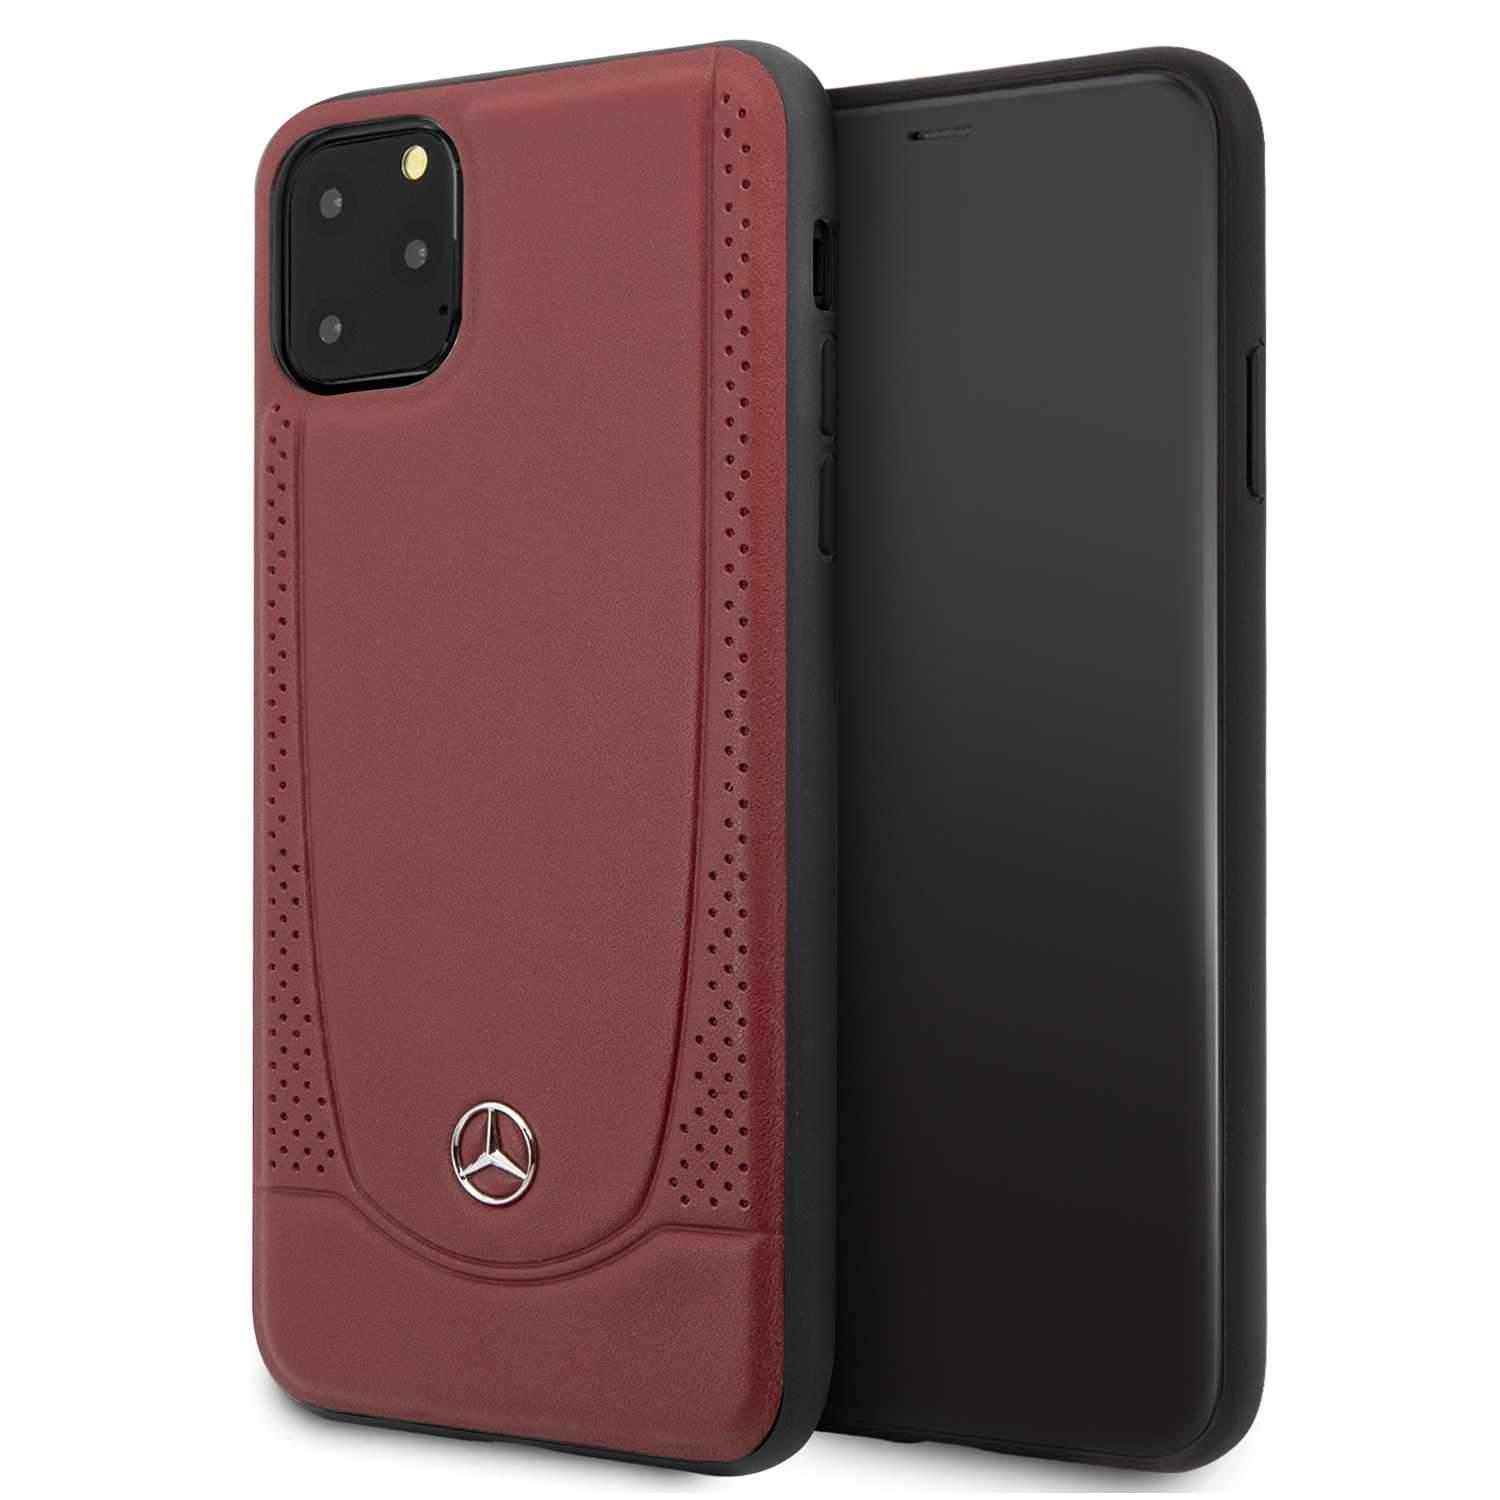 Mercedes-Benz mercedes benz leather hard case perforation for iphone 11 pro max red